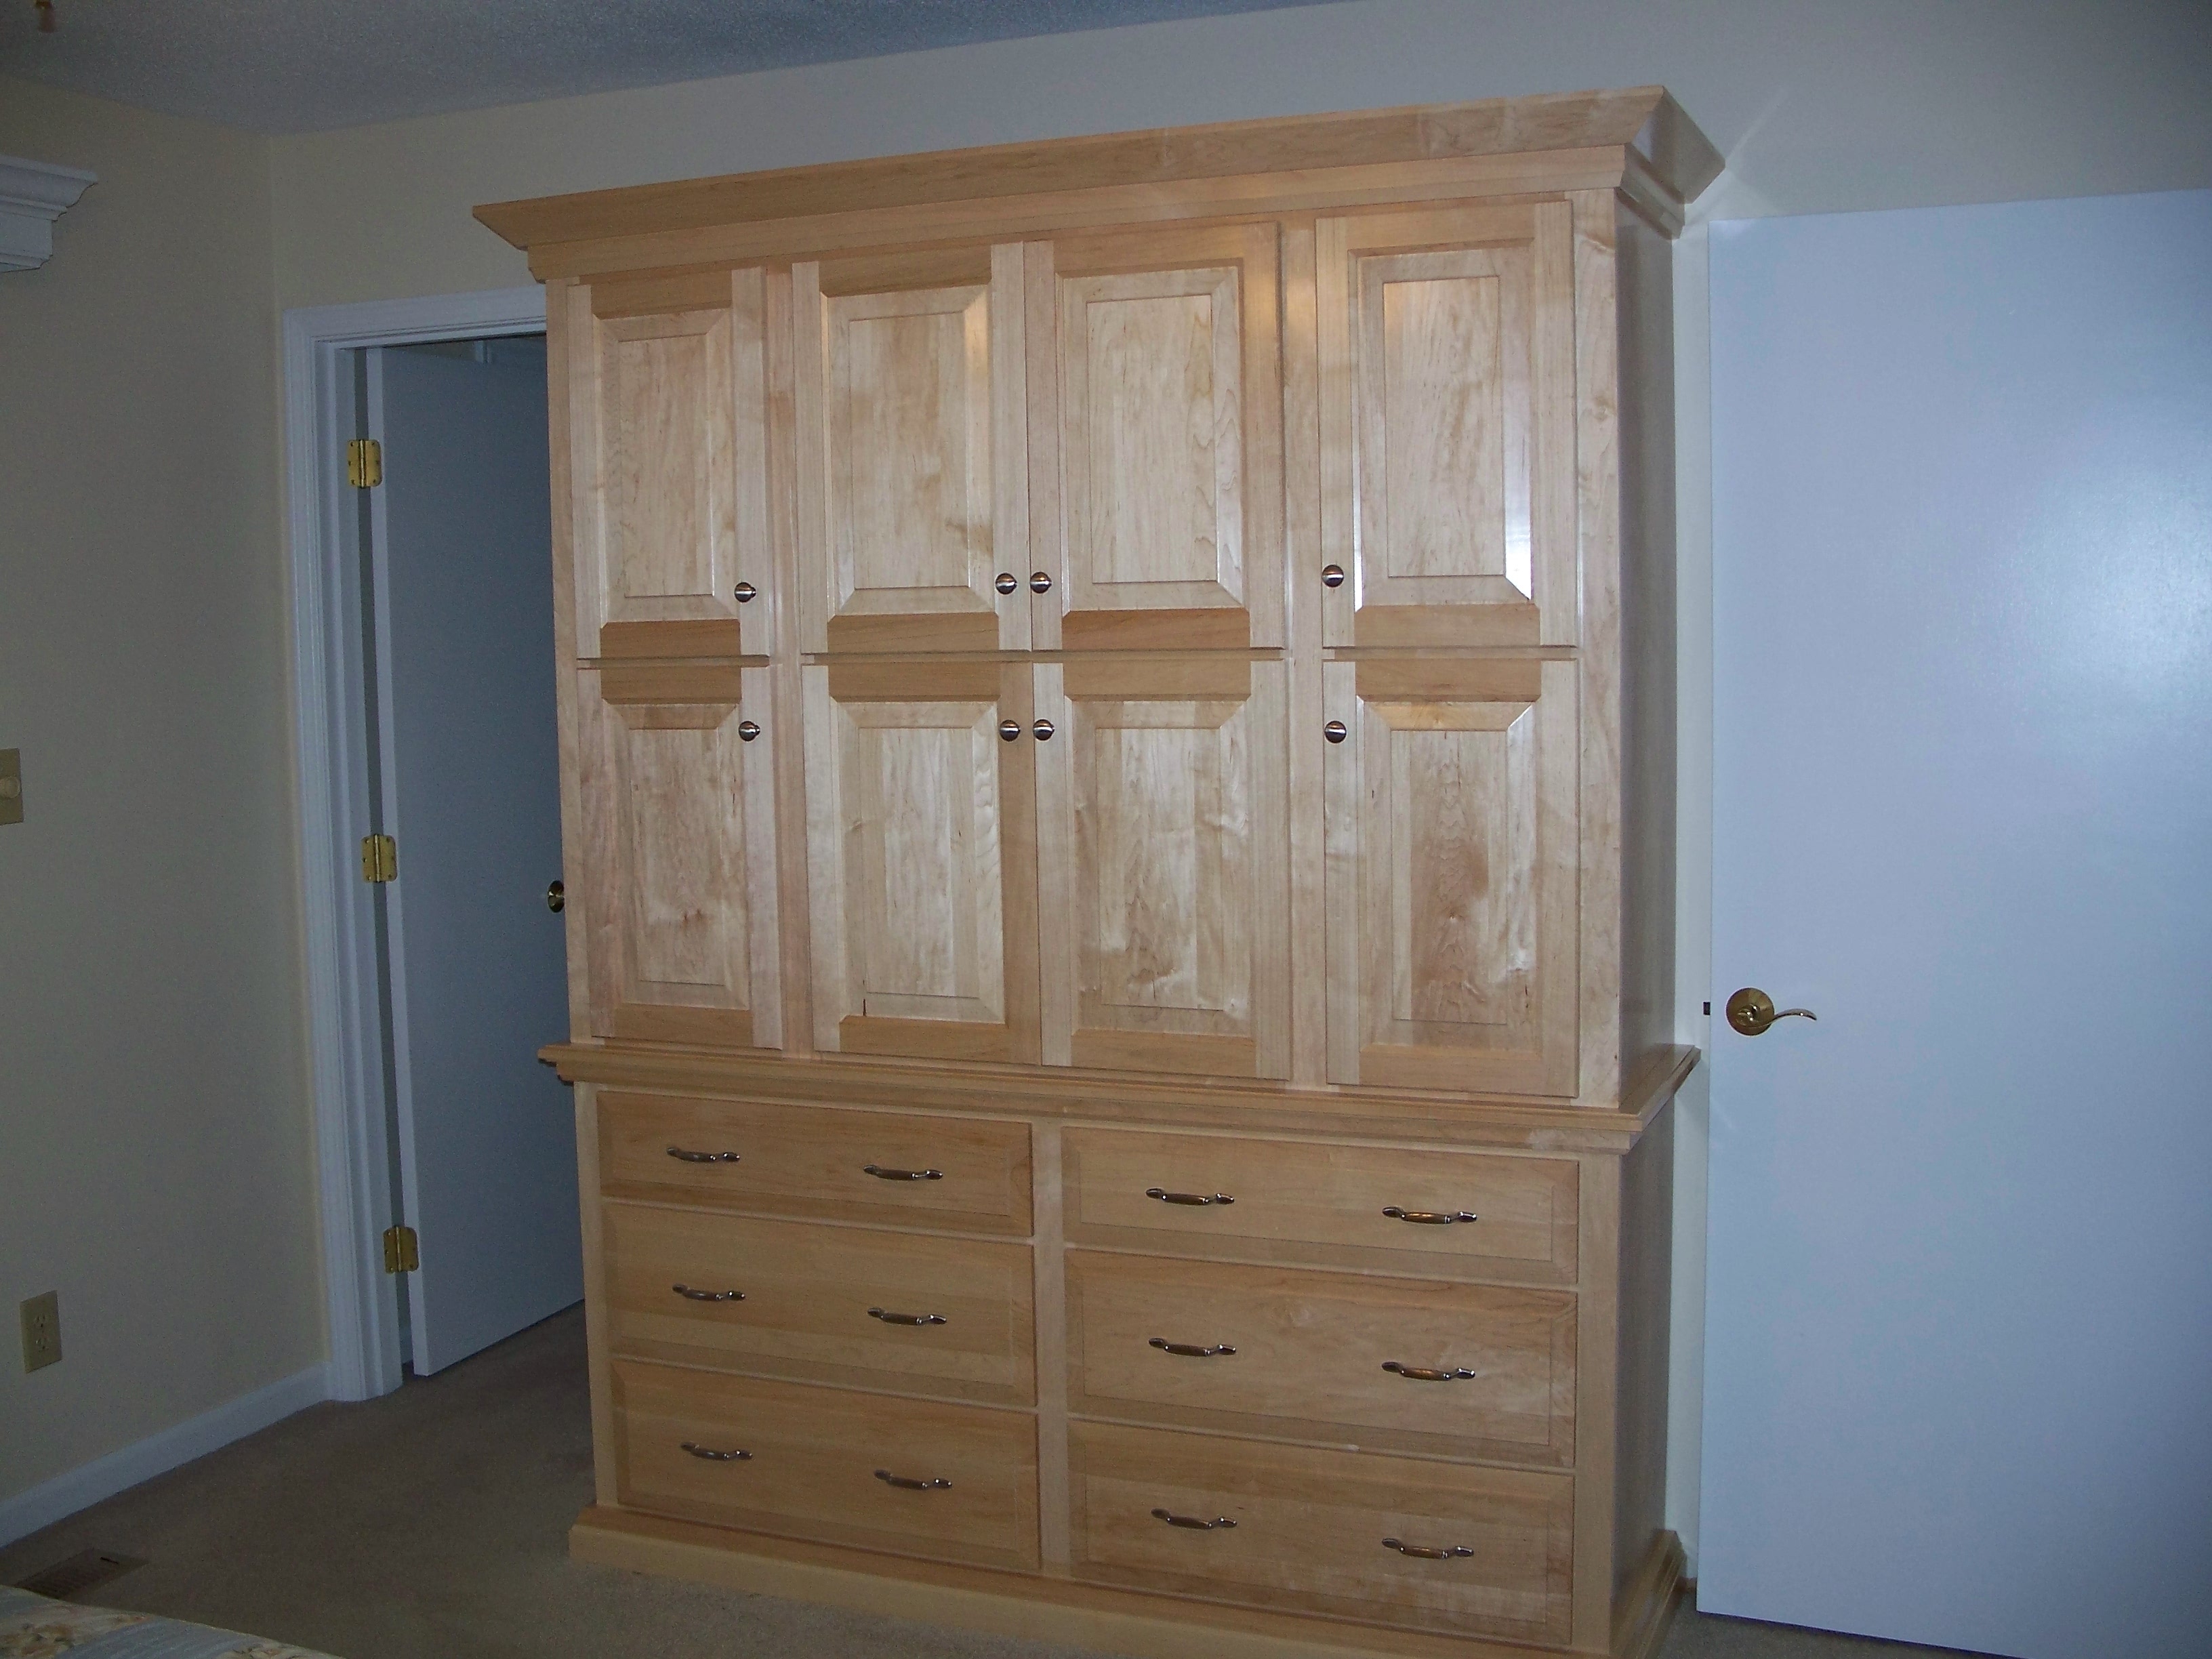 Armoire completed